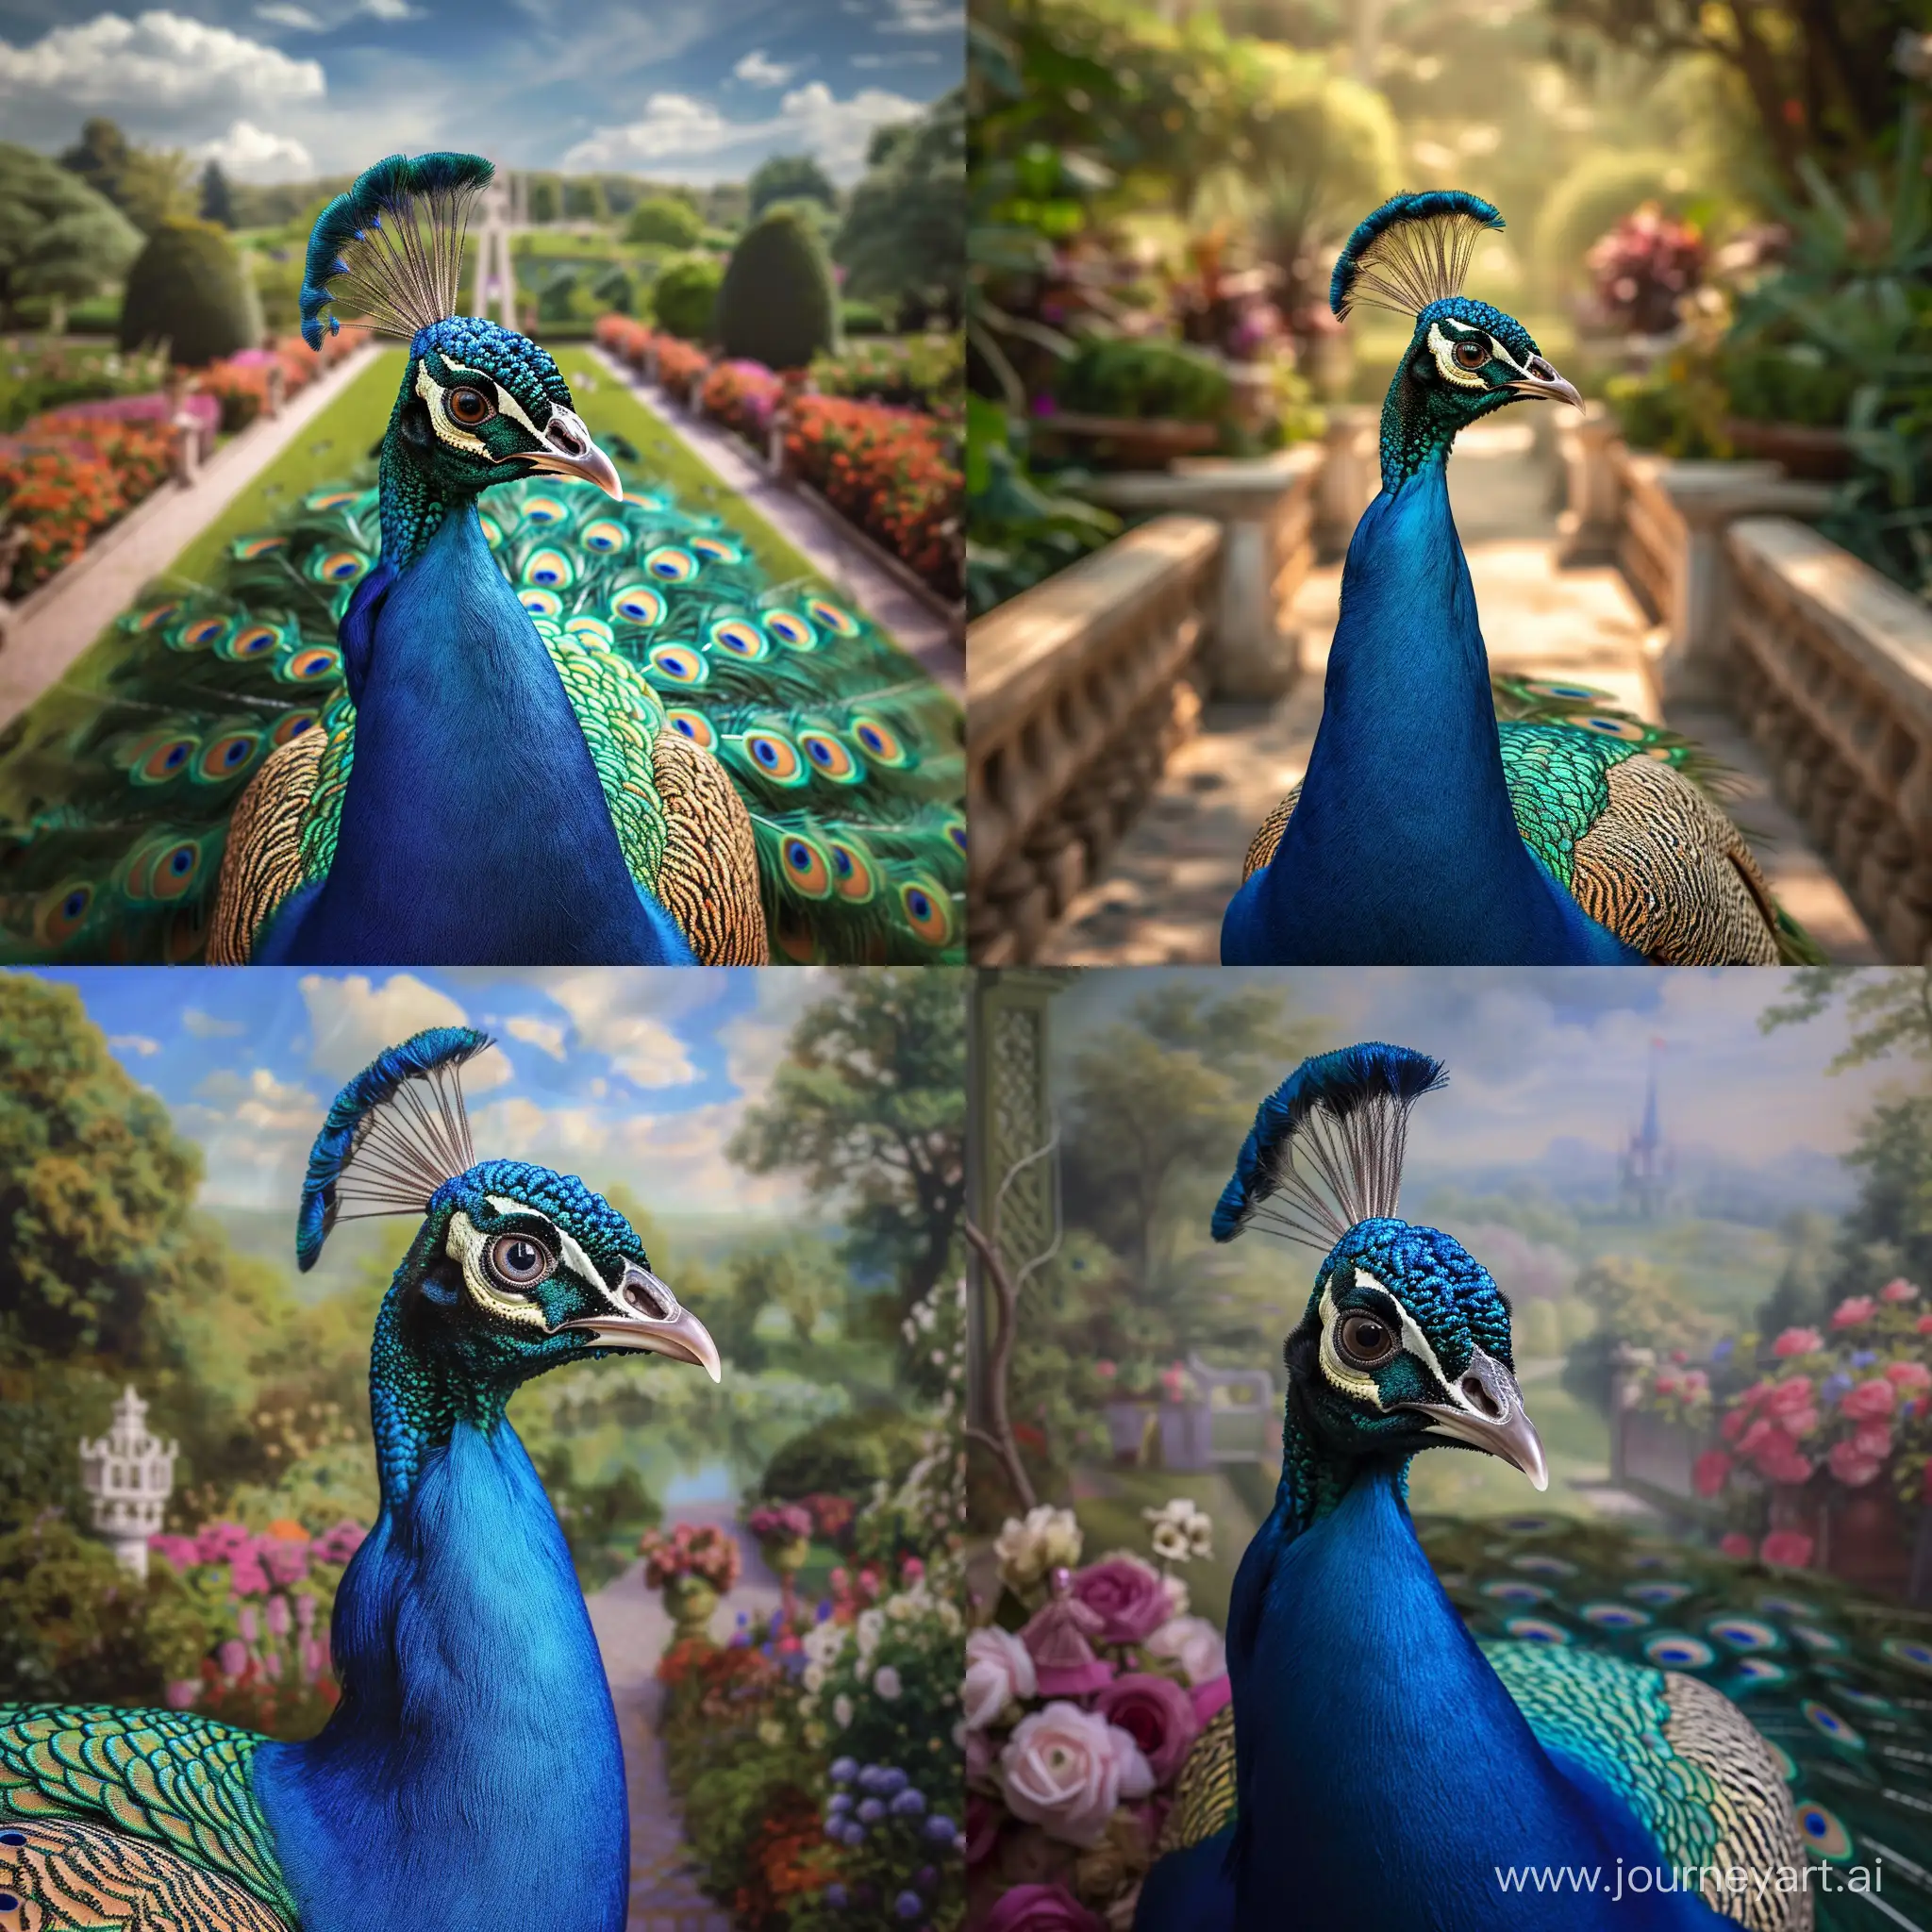 Stunning-UltraRealistic-Peacock-Portrait-in-Enchanted-Garden-Setting